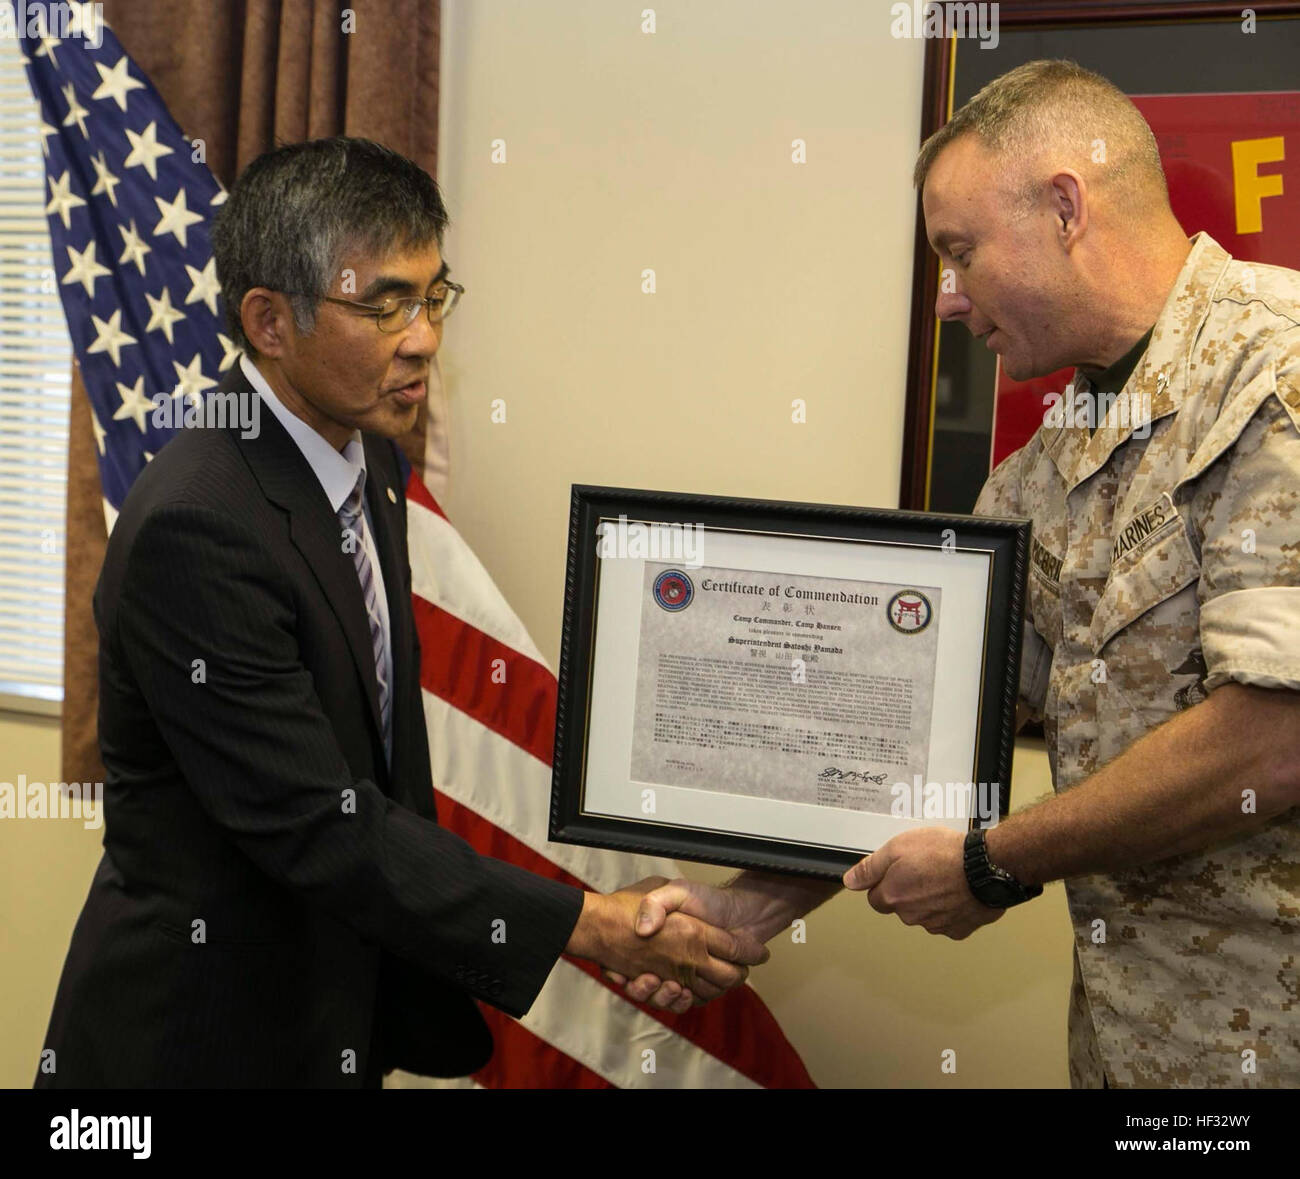 Col. Sean M. McBride, right, presents a certificate of commendation March 12 at Camp Hansen to Satoshi Yamada, the Ishikawa chief of police, for his actions on duty. Yamada is retiring as the police chief after two years. Yamada worked with III Marine Expeditionary Force by helping with disaster relief, anti-terrorism and evacuation drills, the drunken driving campaign and spoke at the welcome aboard seminars for Marines on the Unit Deployment Program. Yamada is from Naha City, Okinawa. McBride is from Butte, Montana, and is the commanding officer for III Marine Expeditionary Force Headquarter Stock Photo